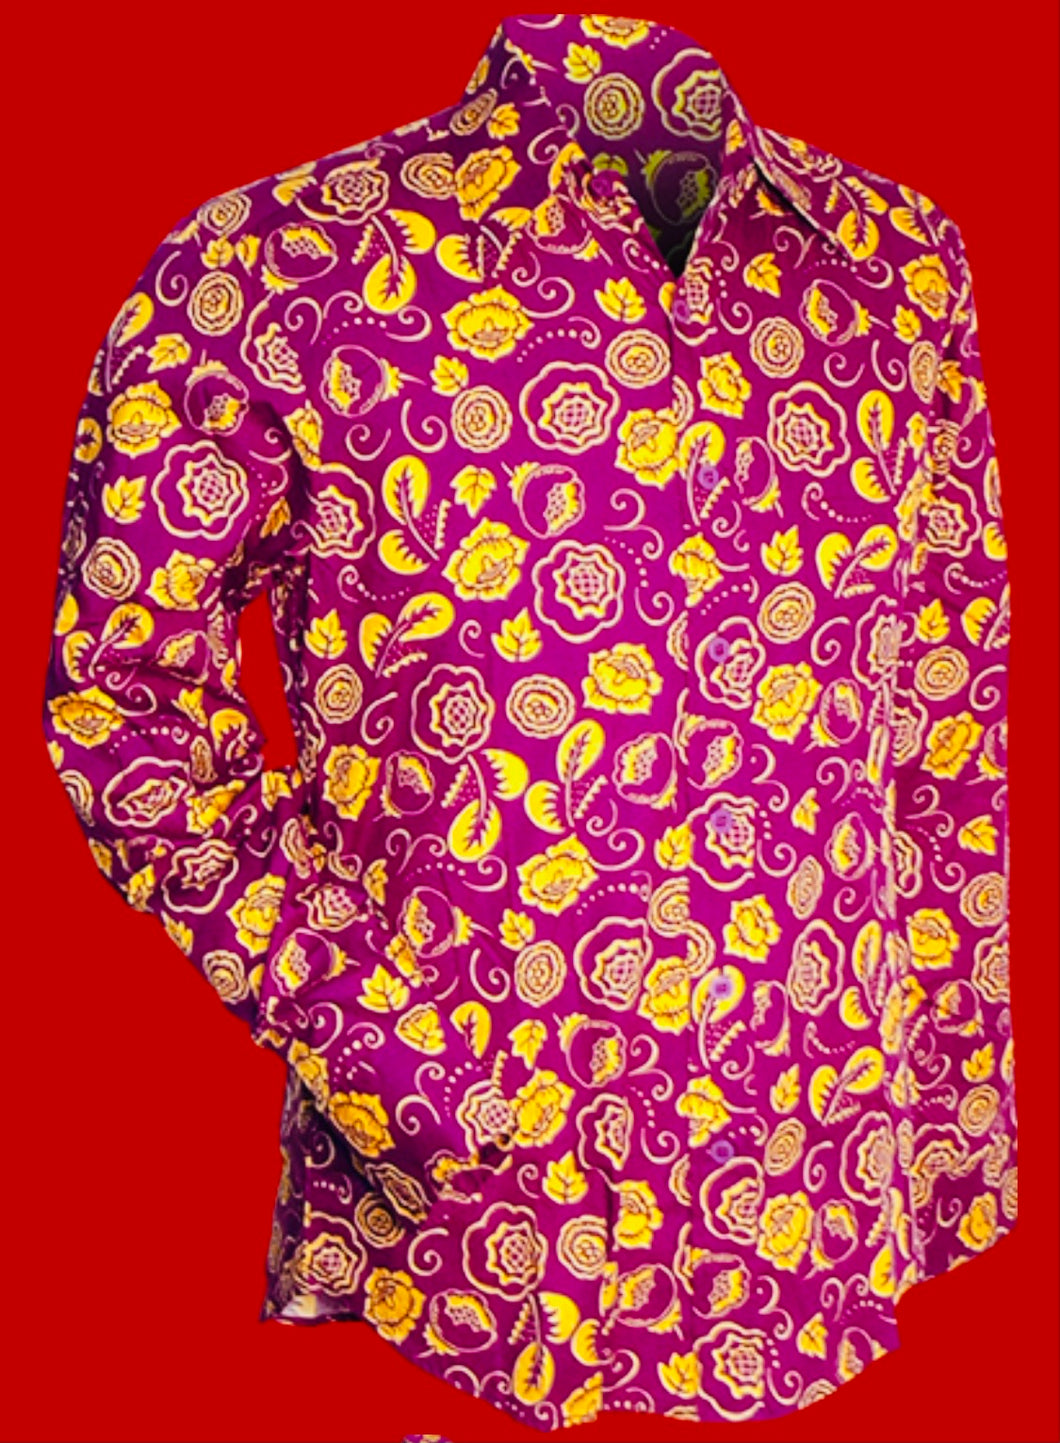 Outlined Flowers design long sleeved Retro 70s style shirt in Violet & Yellow